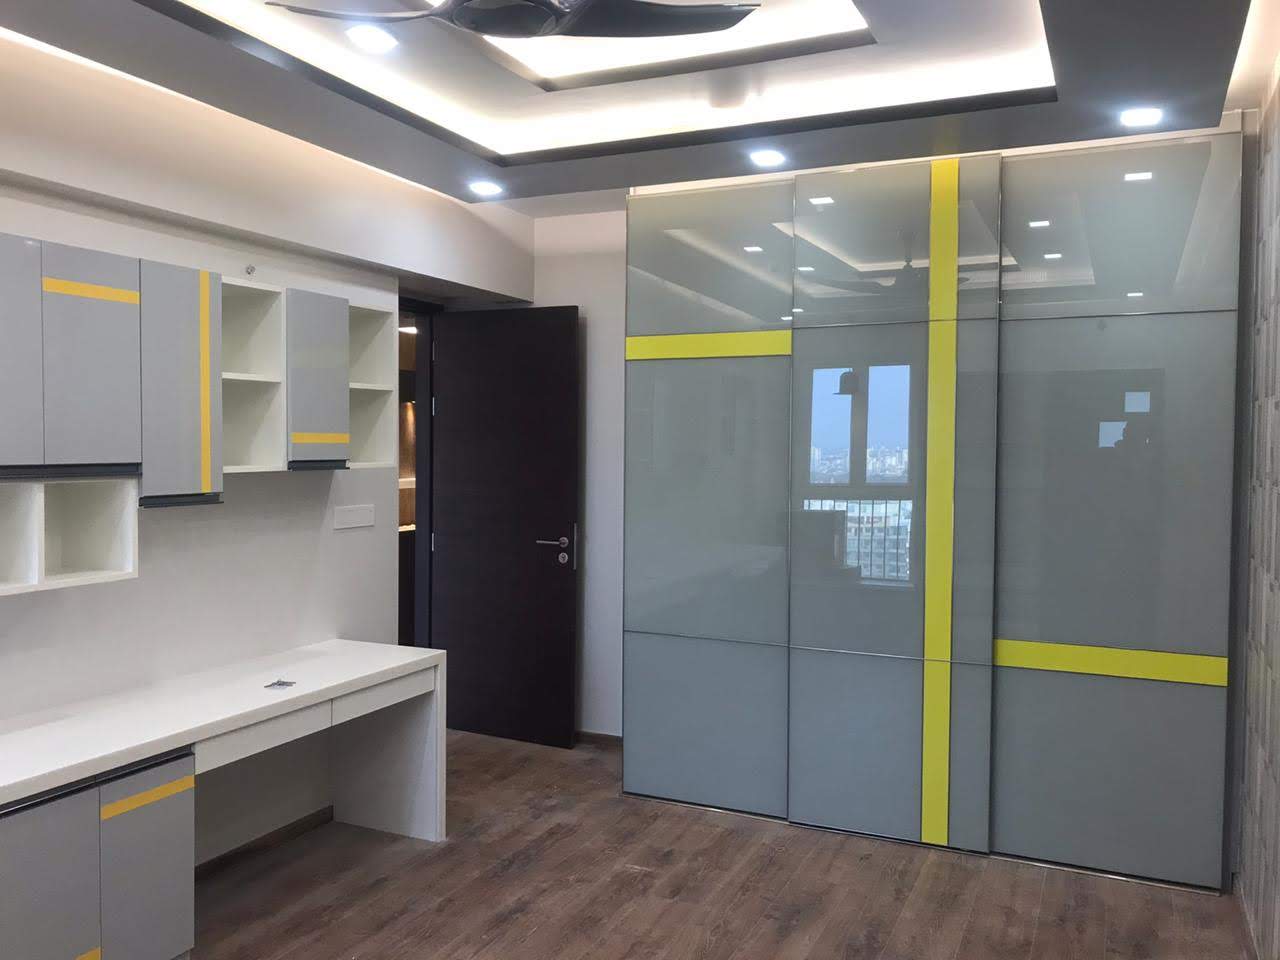 amazing-exclusive-designer-beautiful-lacquer-glass-wardrobes-in-gurgaon-gurgaon-best-dealers-and-manufacturers-in-gurgaon-india